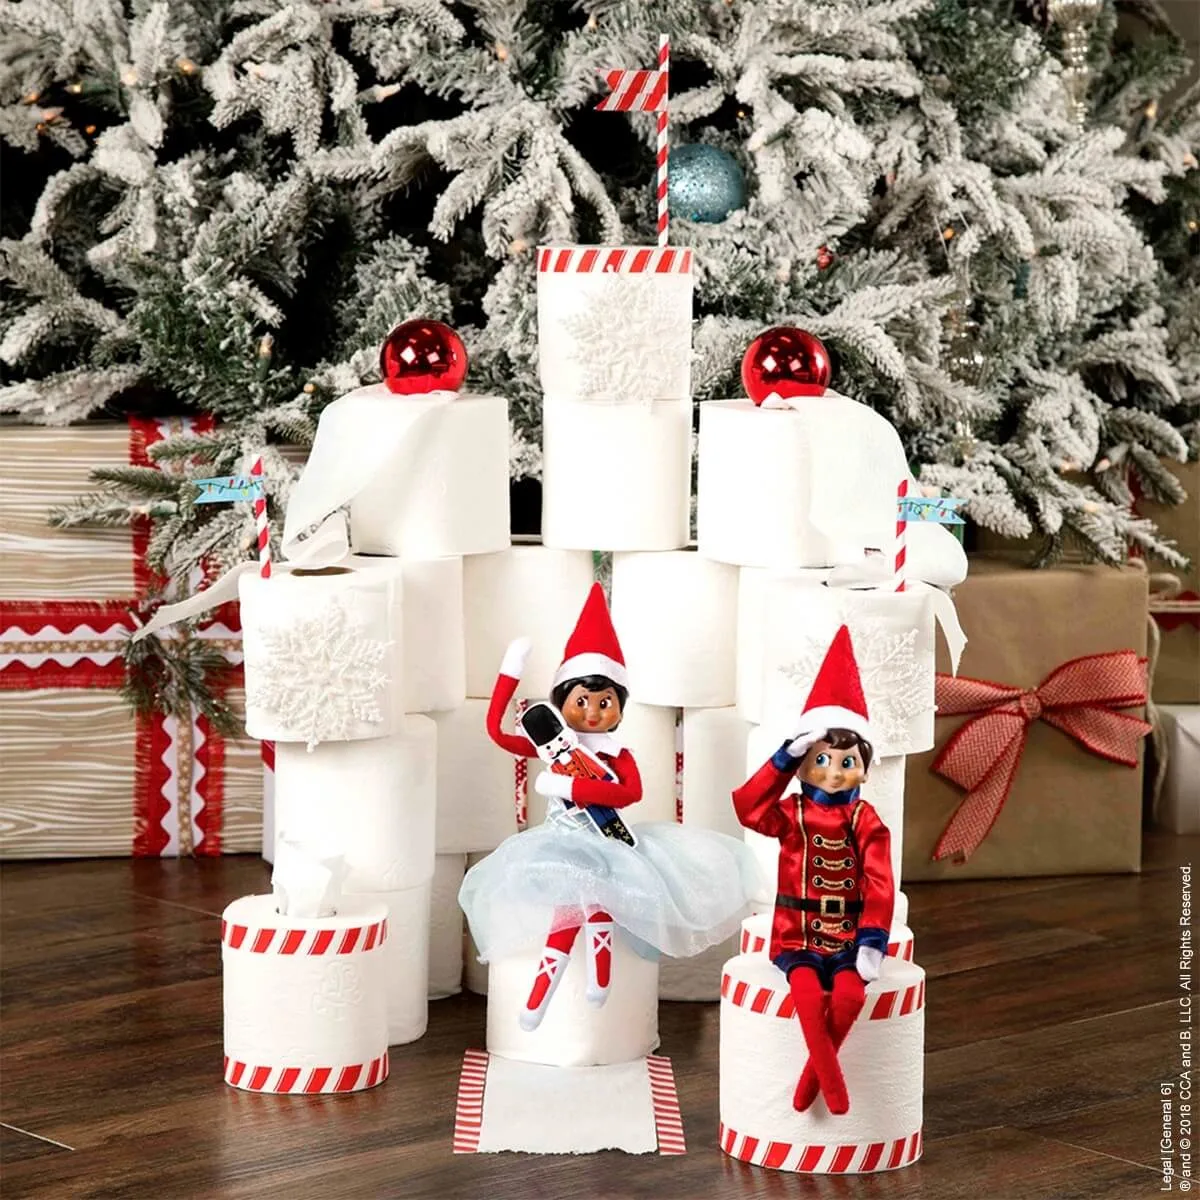 Two elf on the shelf and a toilet paper castle